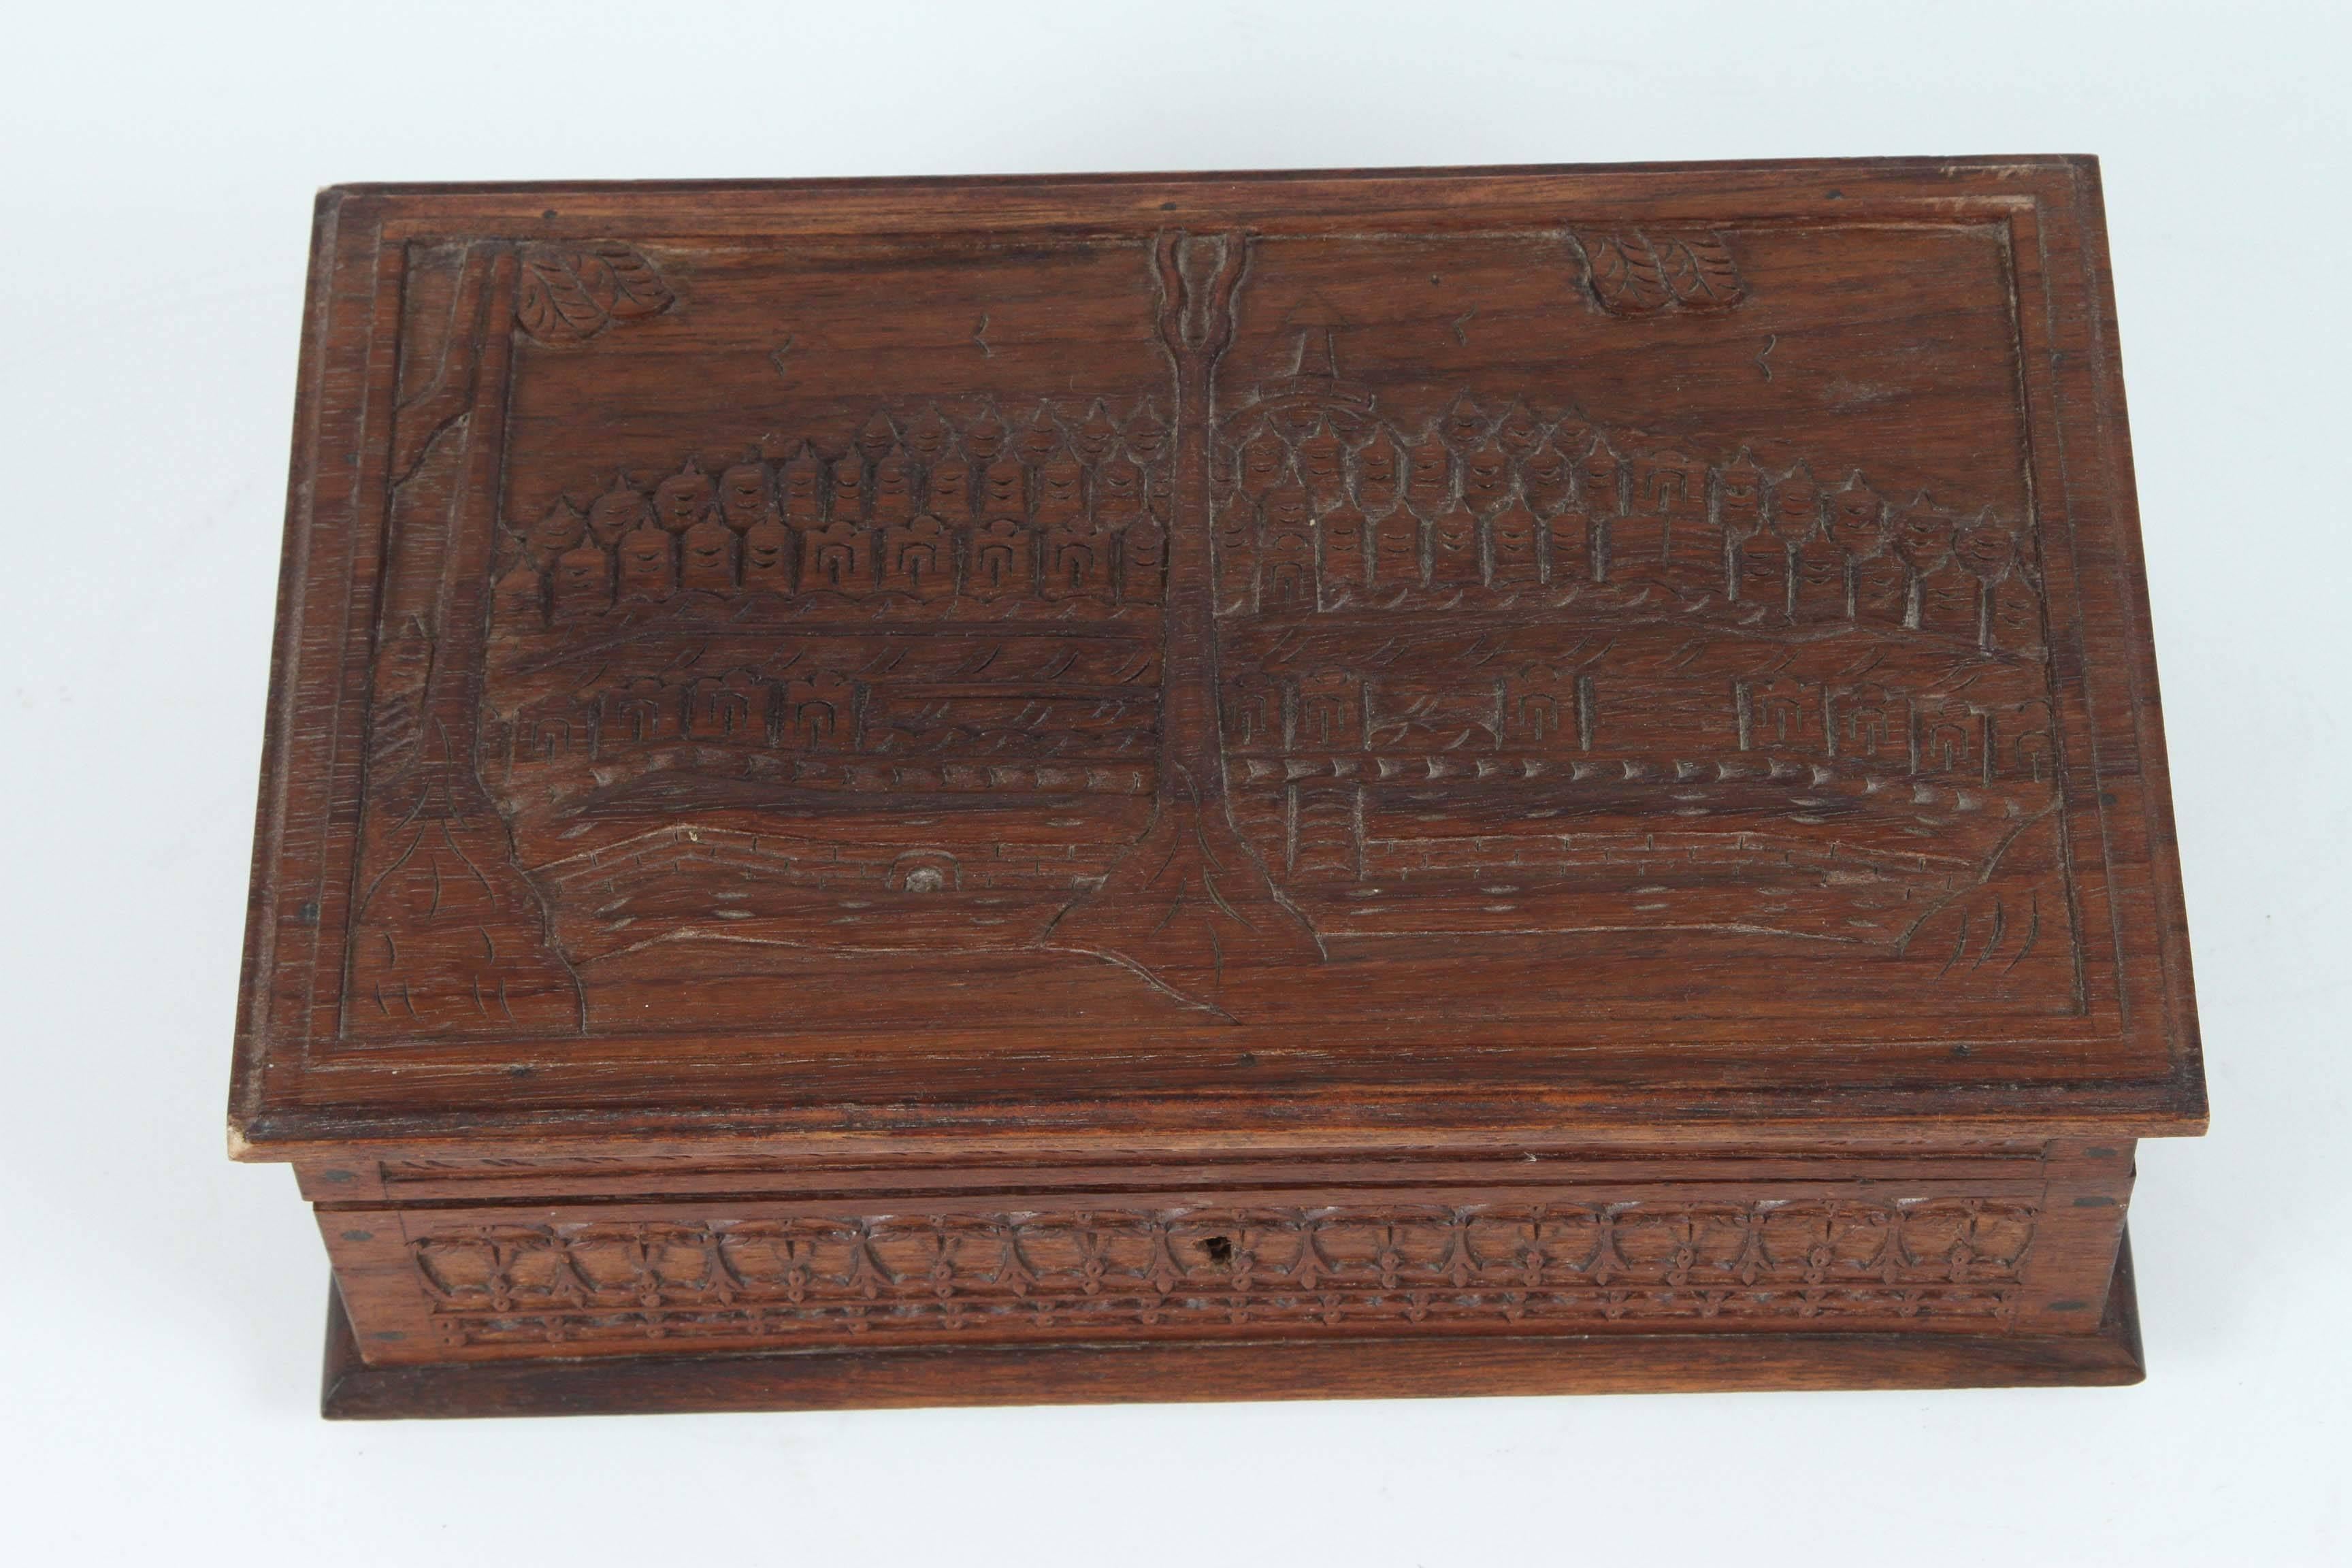 Nice handcrafted Anglo Indian hardwood jewelry box, handmade in India, foliage design on the side and the top is depicting a village in border of a river.
Inside is lined with blue velvet and there is a removable tray.
There is no key.